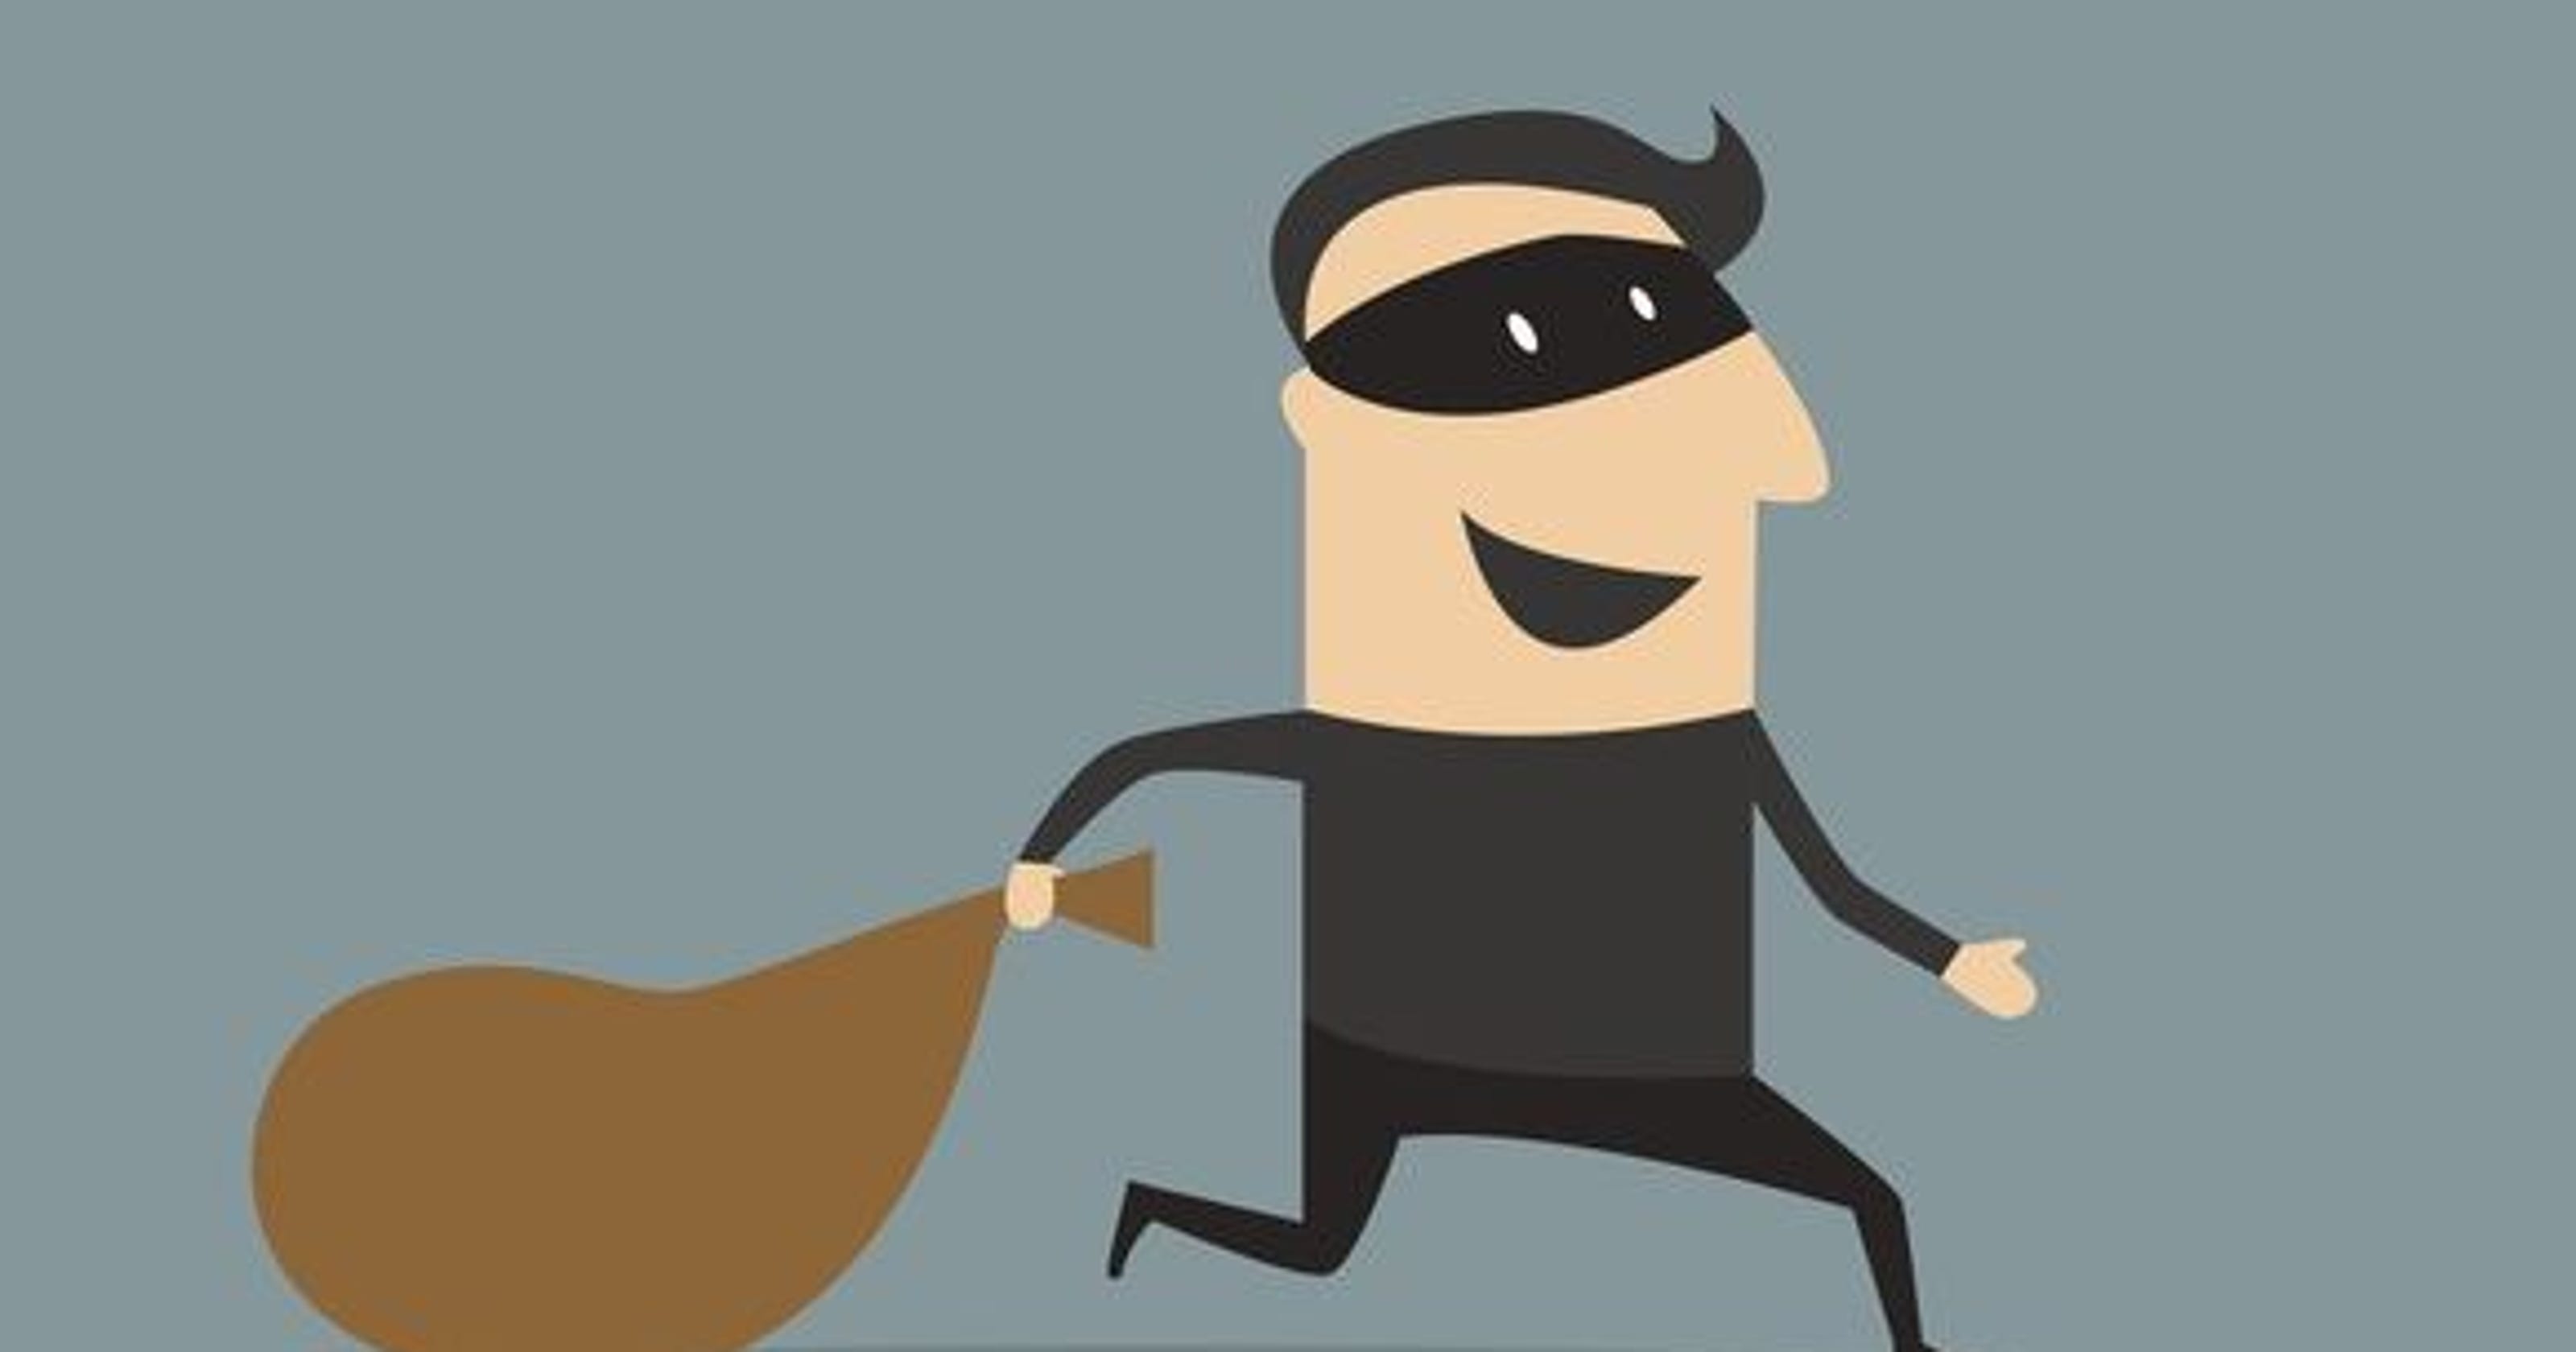 crime clipart employee theft